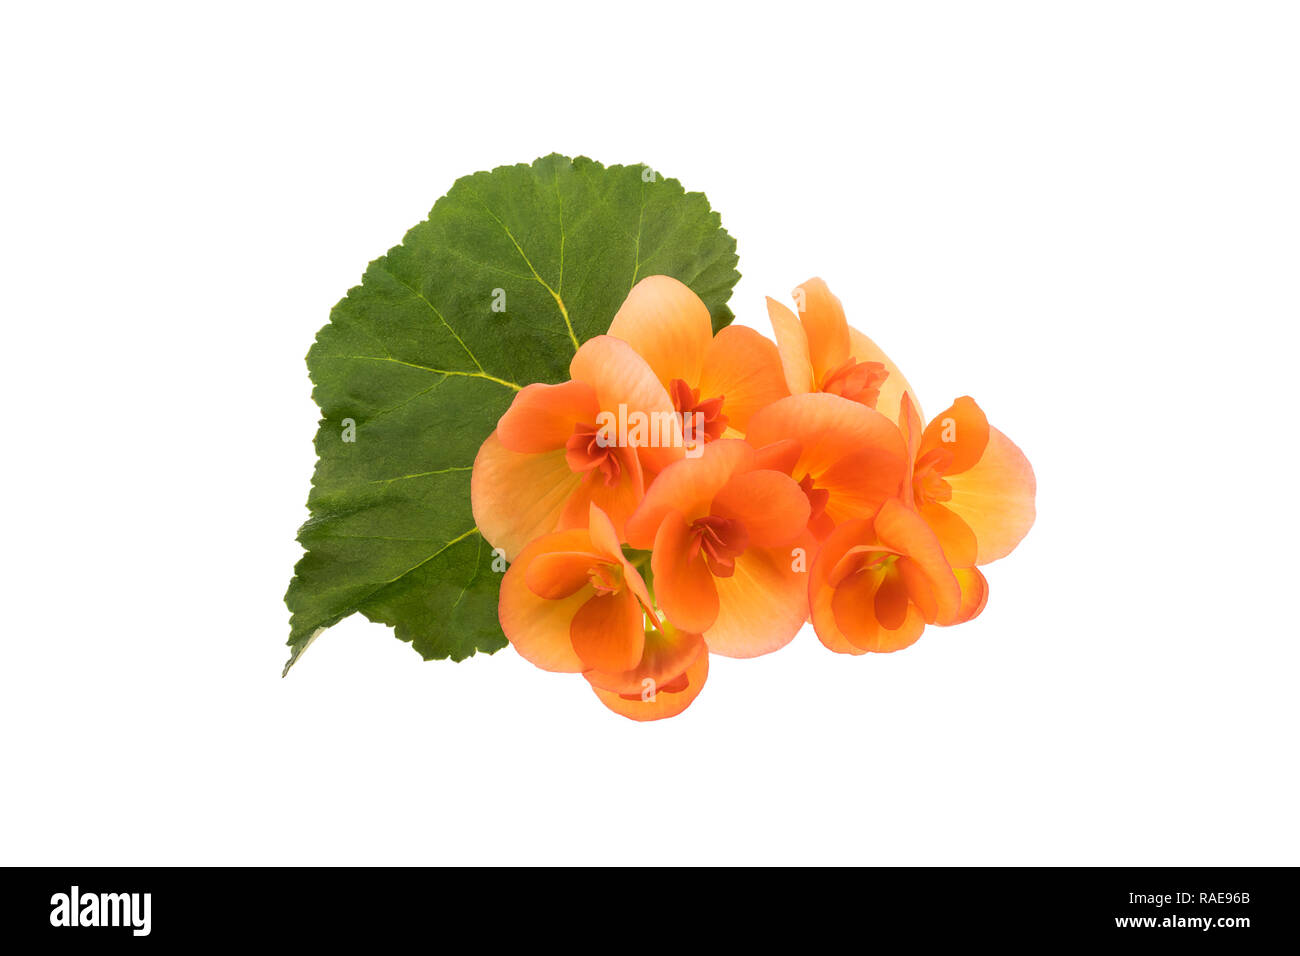 Orange Begonia flowers with green leaf isolated over white Stock Photo